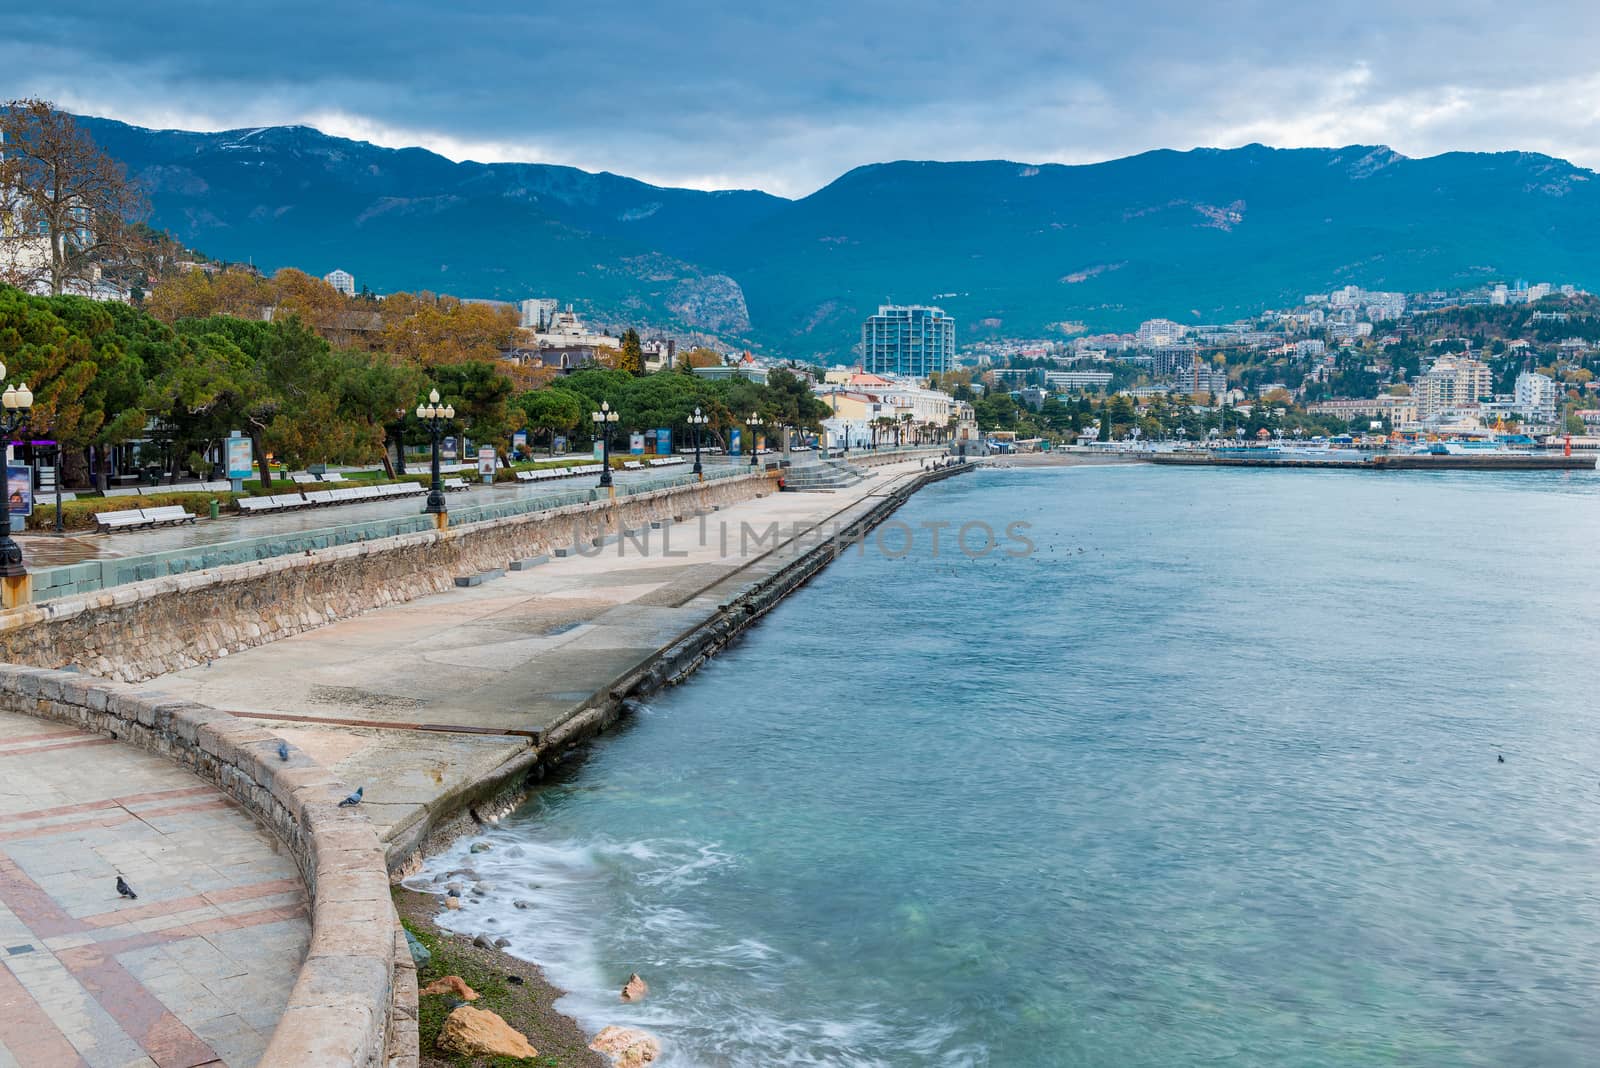 View of the city of Yalta and the embankment of the sea, the mou by kosmsos111